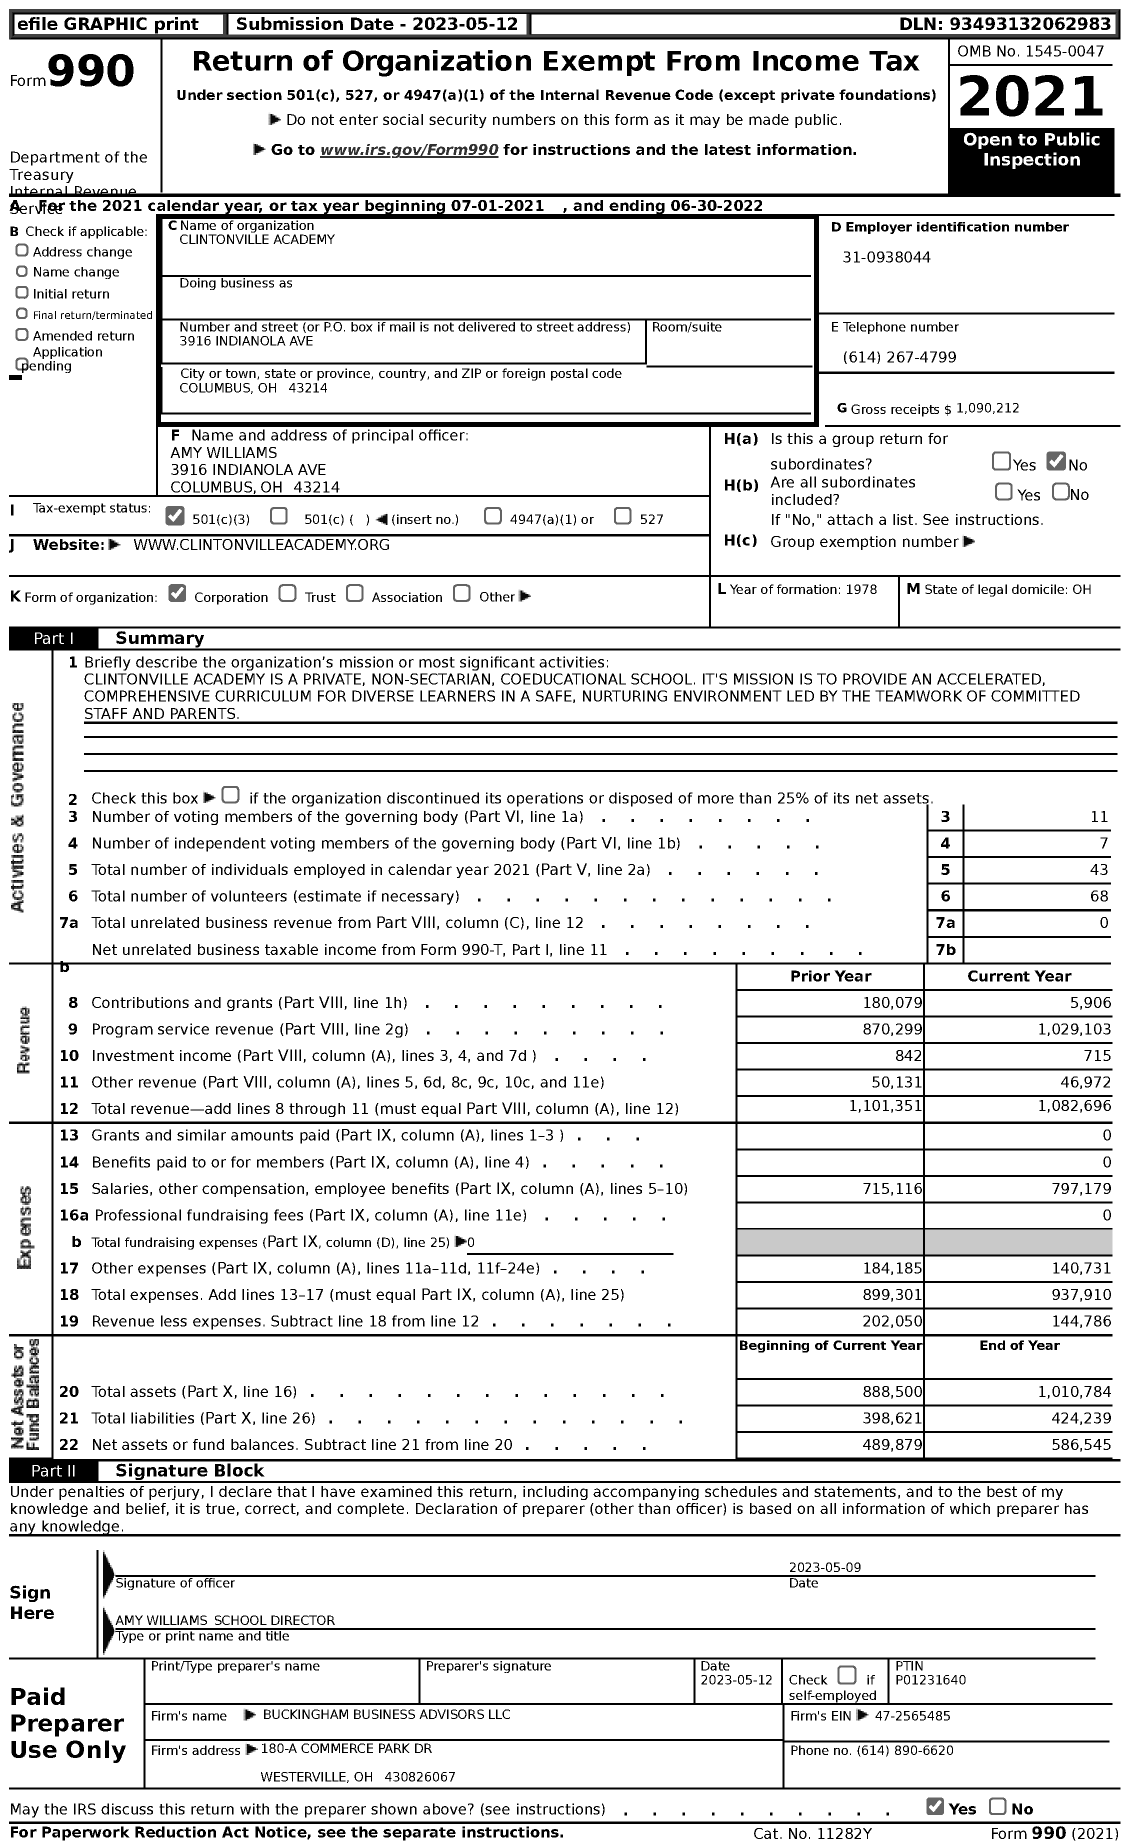 Image of first page of 2021 Form 990 for Clintonville Academy